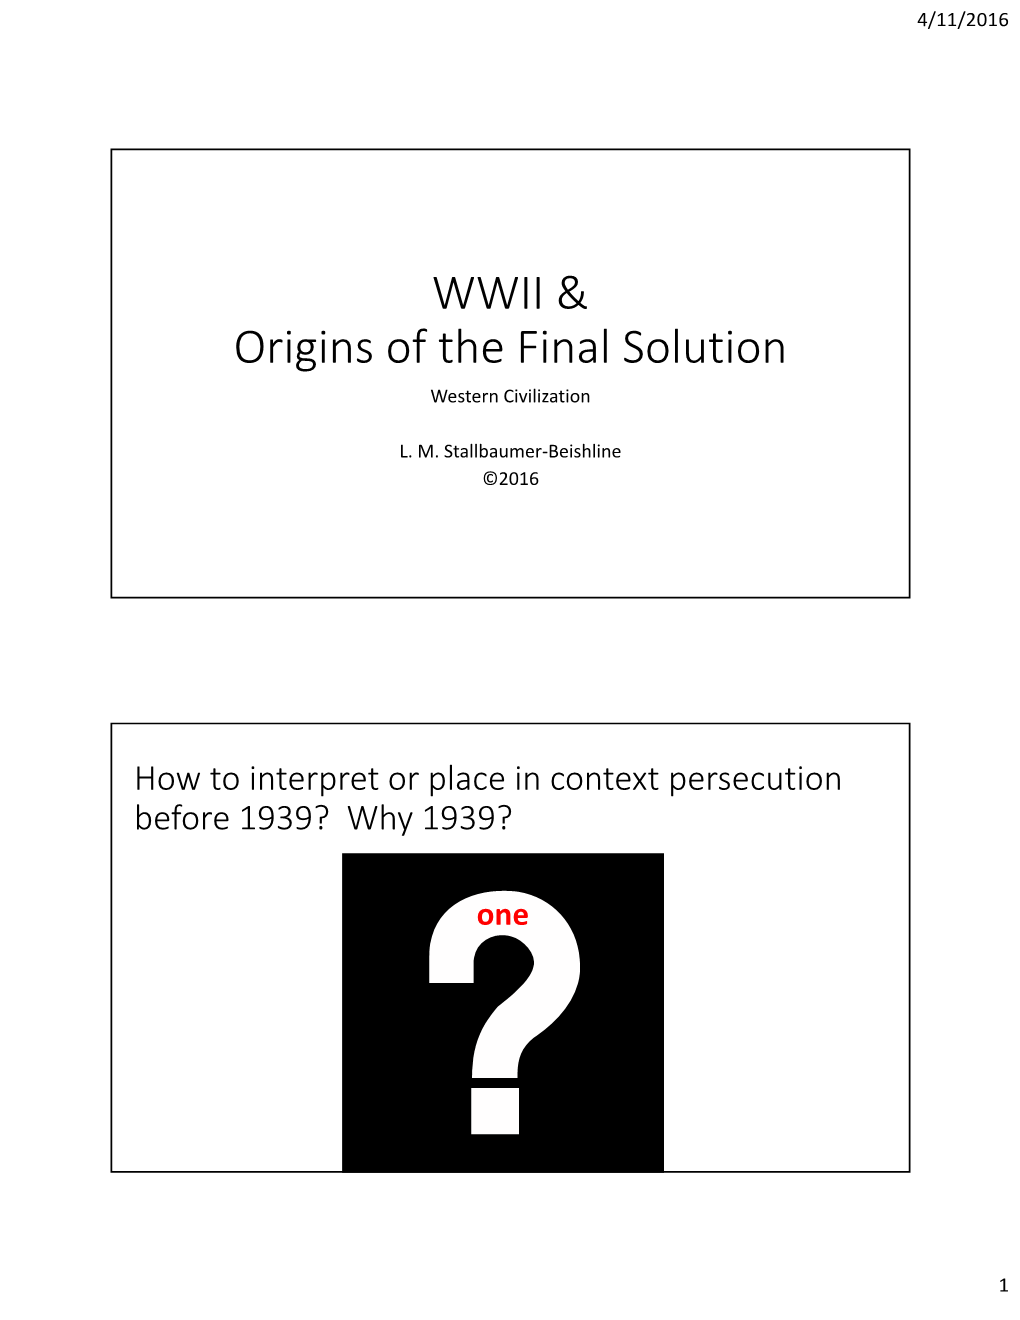 WWII & Origins of the Final Solution